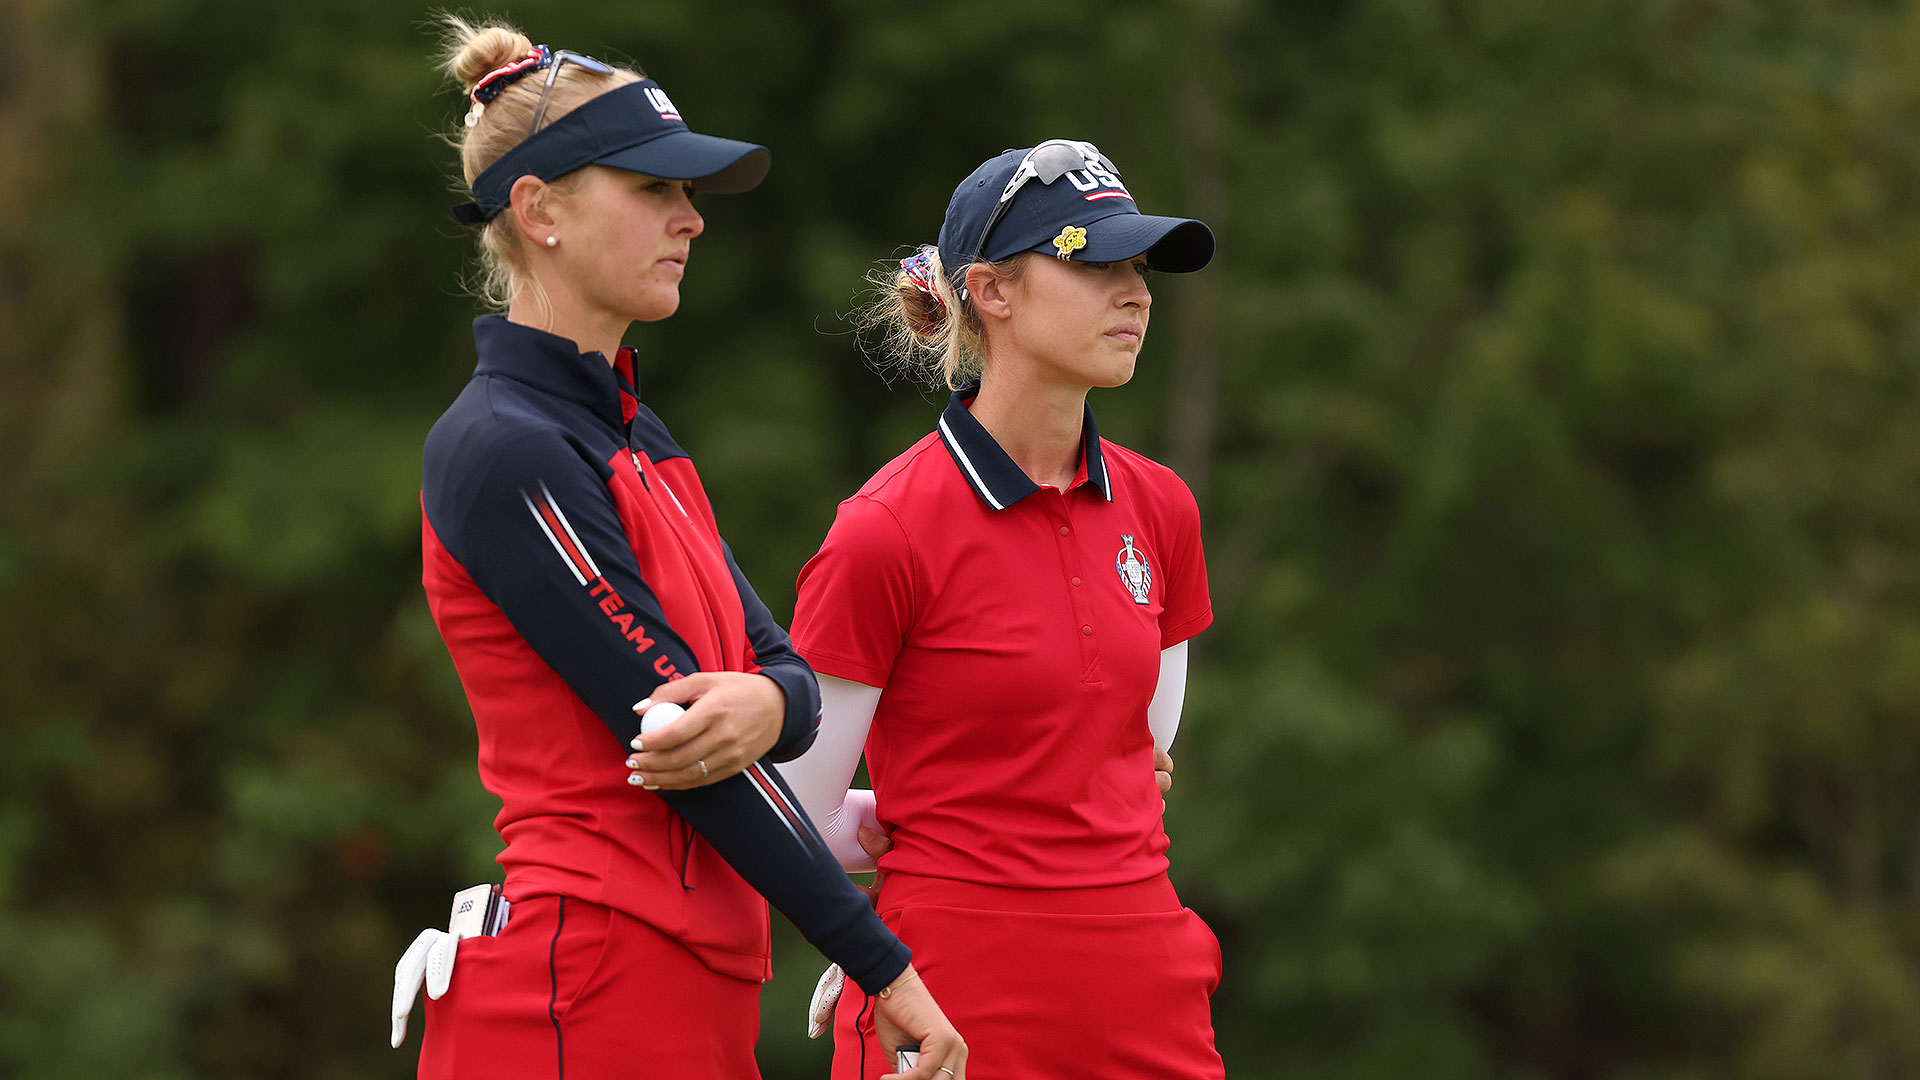 Korda sisters can’t find their groove, lose for first time as Solheim Cup partners